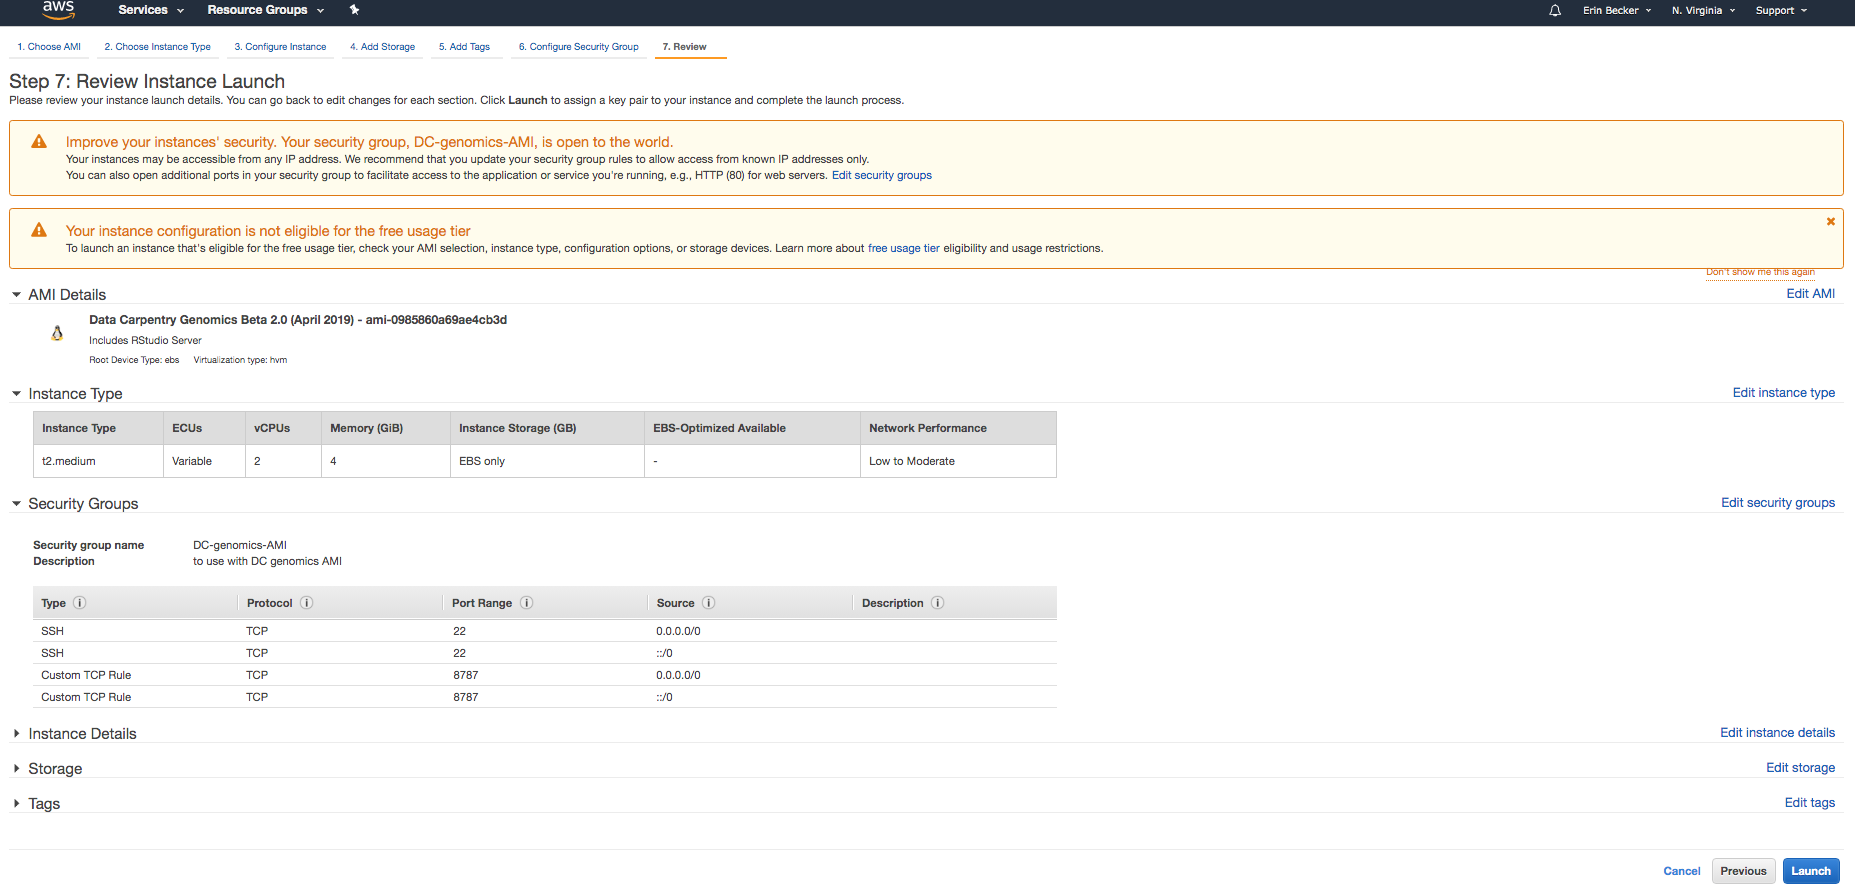 Screenshot of AMI launch wizard showing review page for launching new instance.